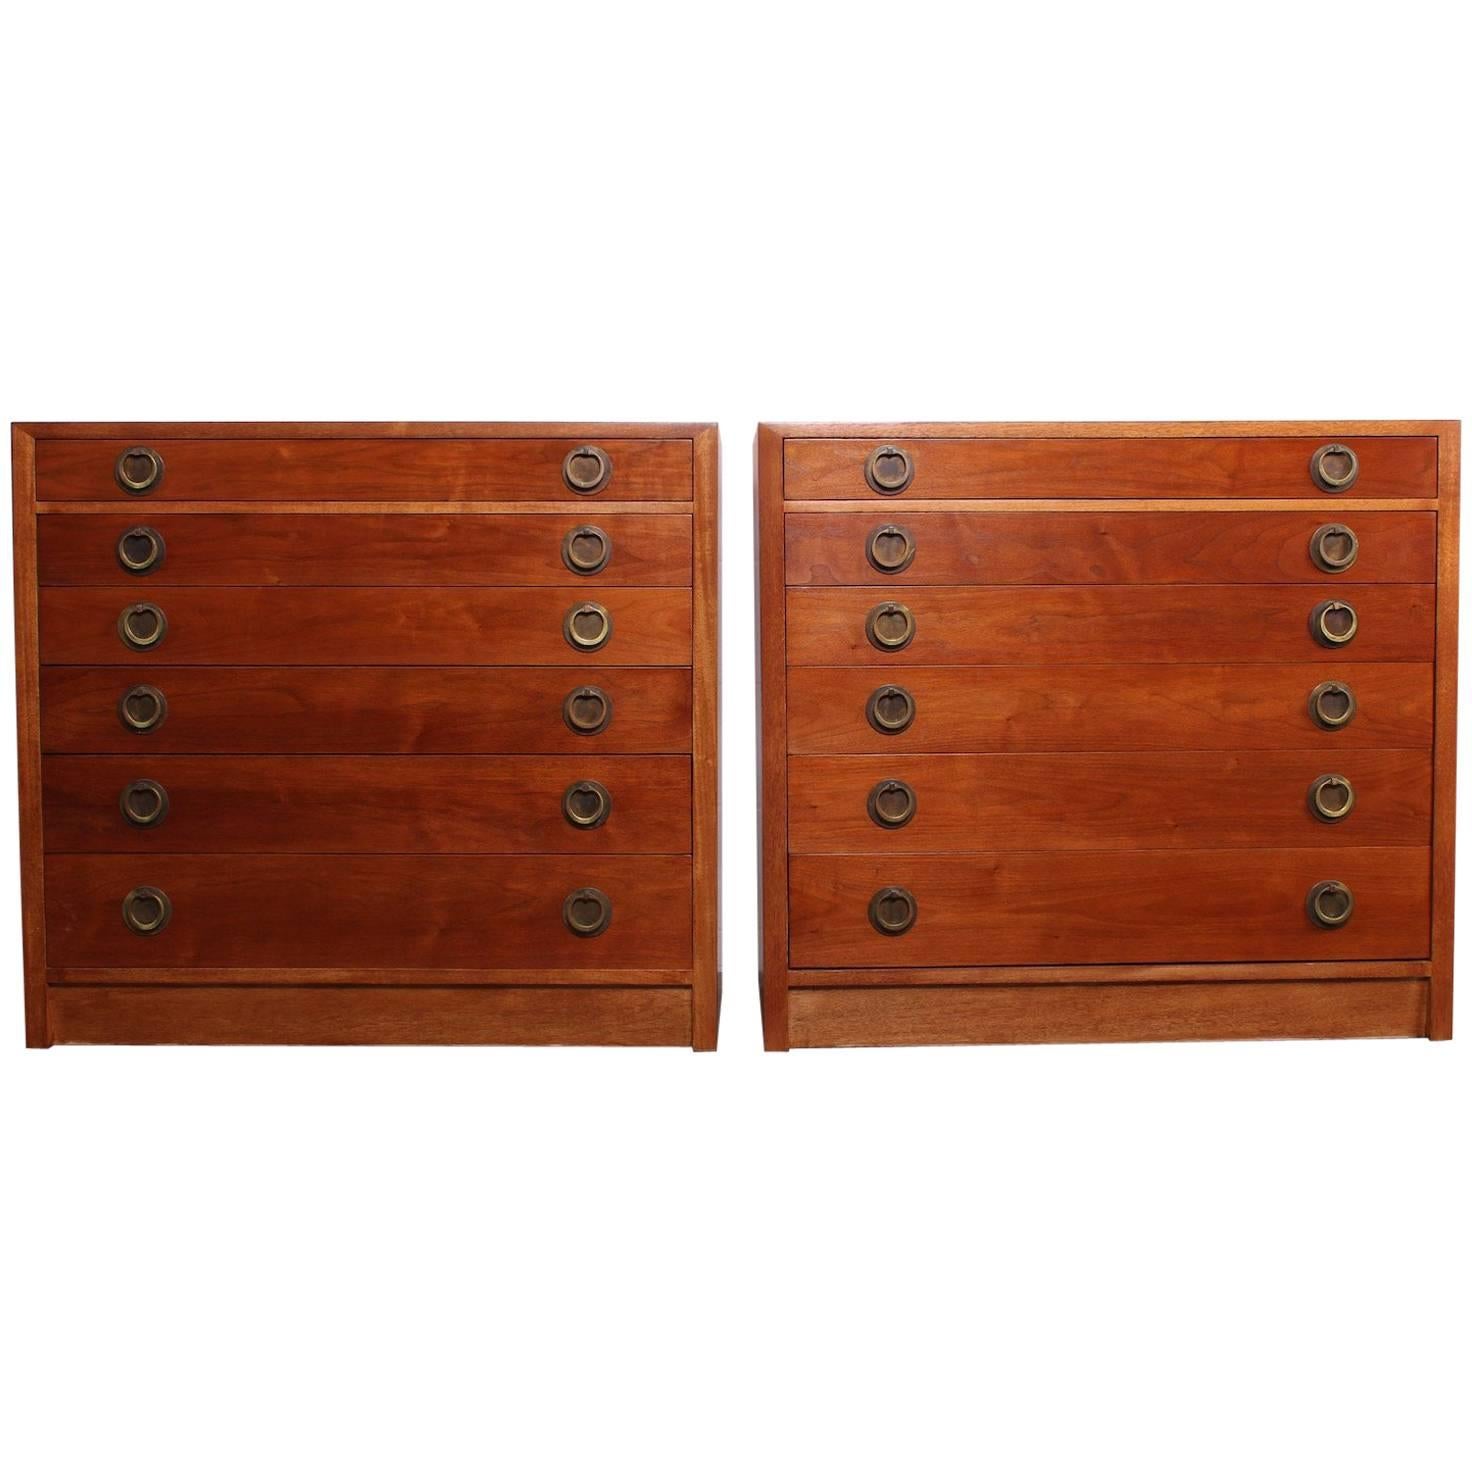 Pair of Chests by Edward Wormley for Dunbar